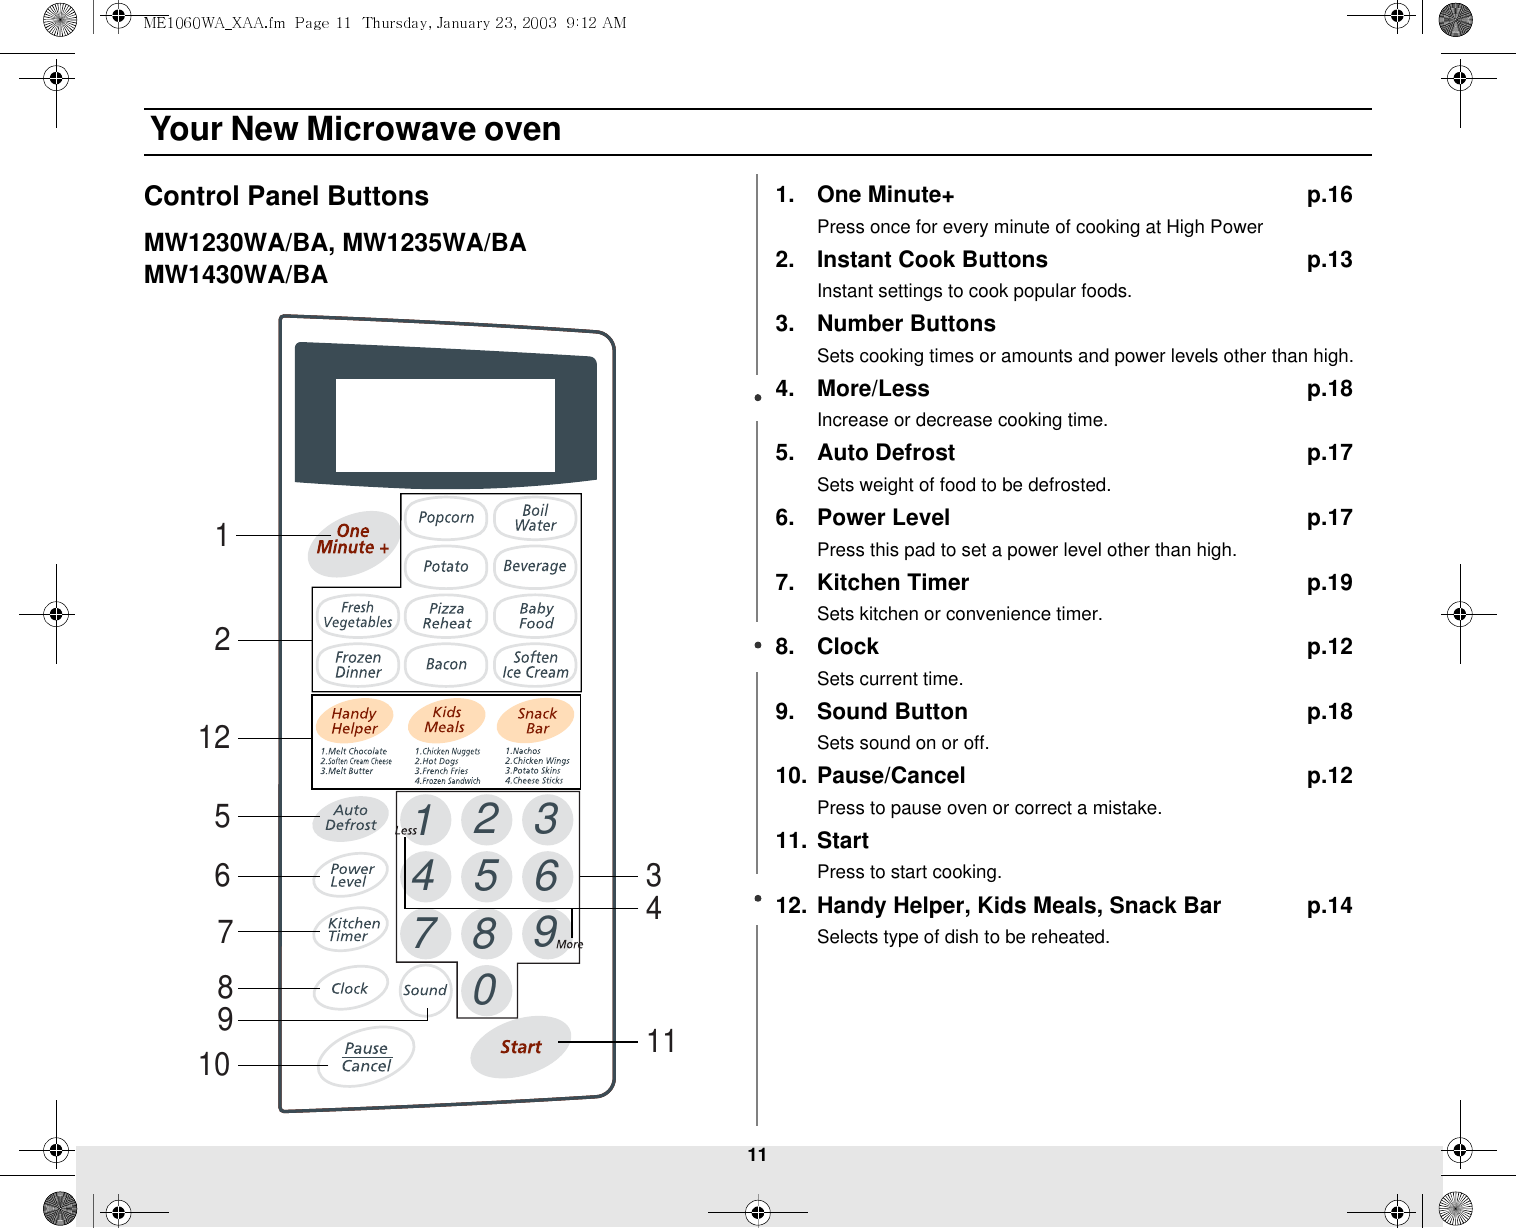 11 Your New Microwave ovenControl Panel ButtonsMW1230WA/BA, MW1235WA/BAMW1430WA/BA1. One Minute+ p.16Press once for every minute of cooking at High Power2. Instant Cook Buttons p.13Instant settings to cook popular foods.3. Number ButtonsSets cooking times or amounts and power levels other than high.4. More/Less p.18Increase or decrease cooking time.5. Auto Defrost p.17 Sets weight of food to be defrosted.6. Power Level p.17Press this pad to set a power level other than high.7. Kitchen Timer p.19Sets kitchen or convenience timer.8. Clock p.12Sets current time.9. Sound Button p.18Sets sound on or off.10. Pause/Cancel p.12Press to pause oven or correct a mistake.11. StartPress to start cooking.12. Handy Helper, Kids Meals, Snack Bar p.14Selects type of dish to be reheated.1321654987023411568710129